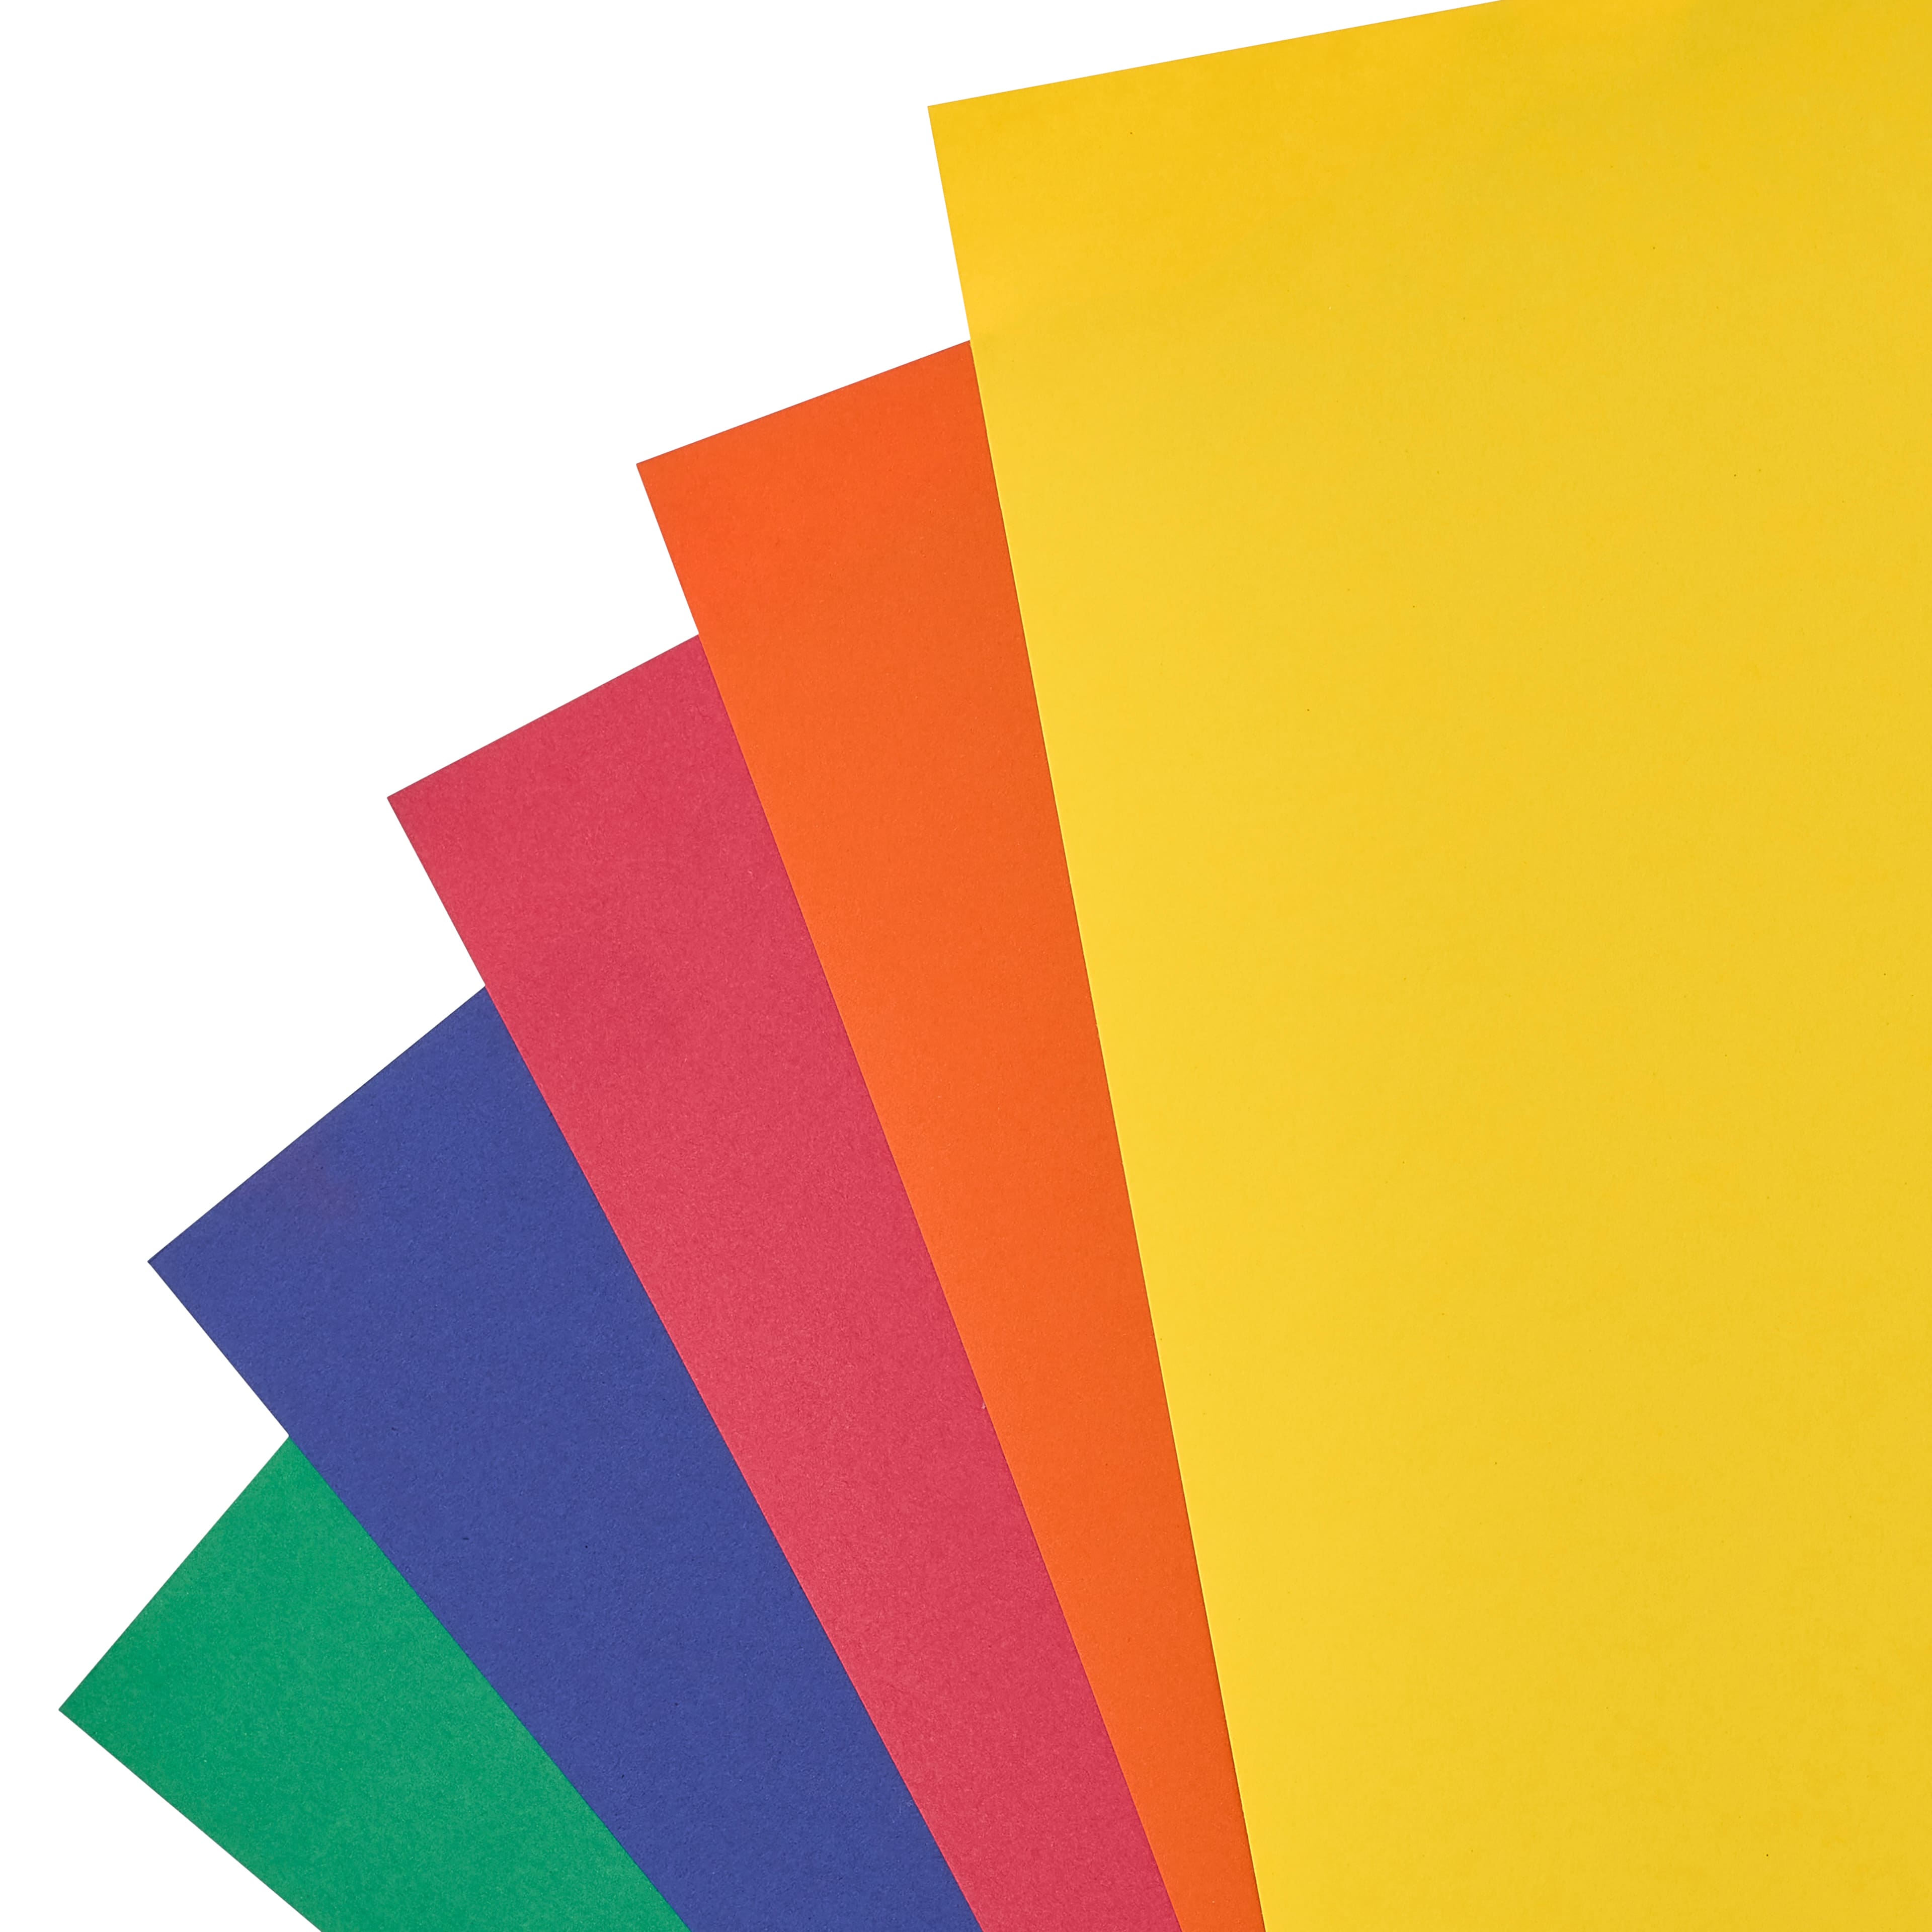 Primary One 5-Color Assortment Cardstock - 8 1/2 x 11 in 65 lb